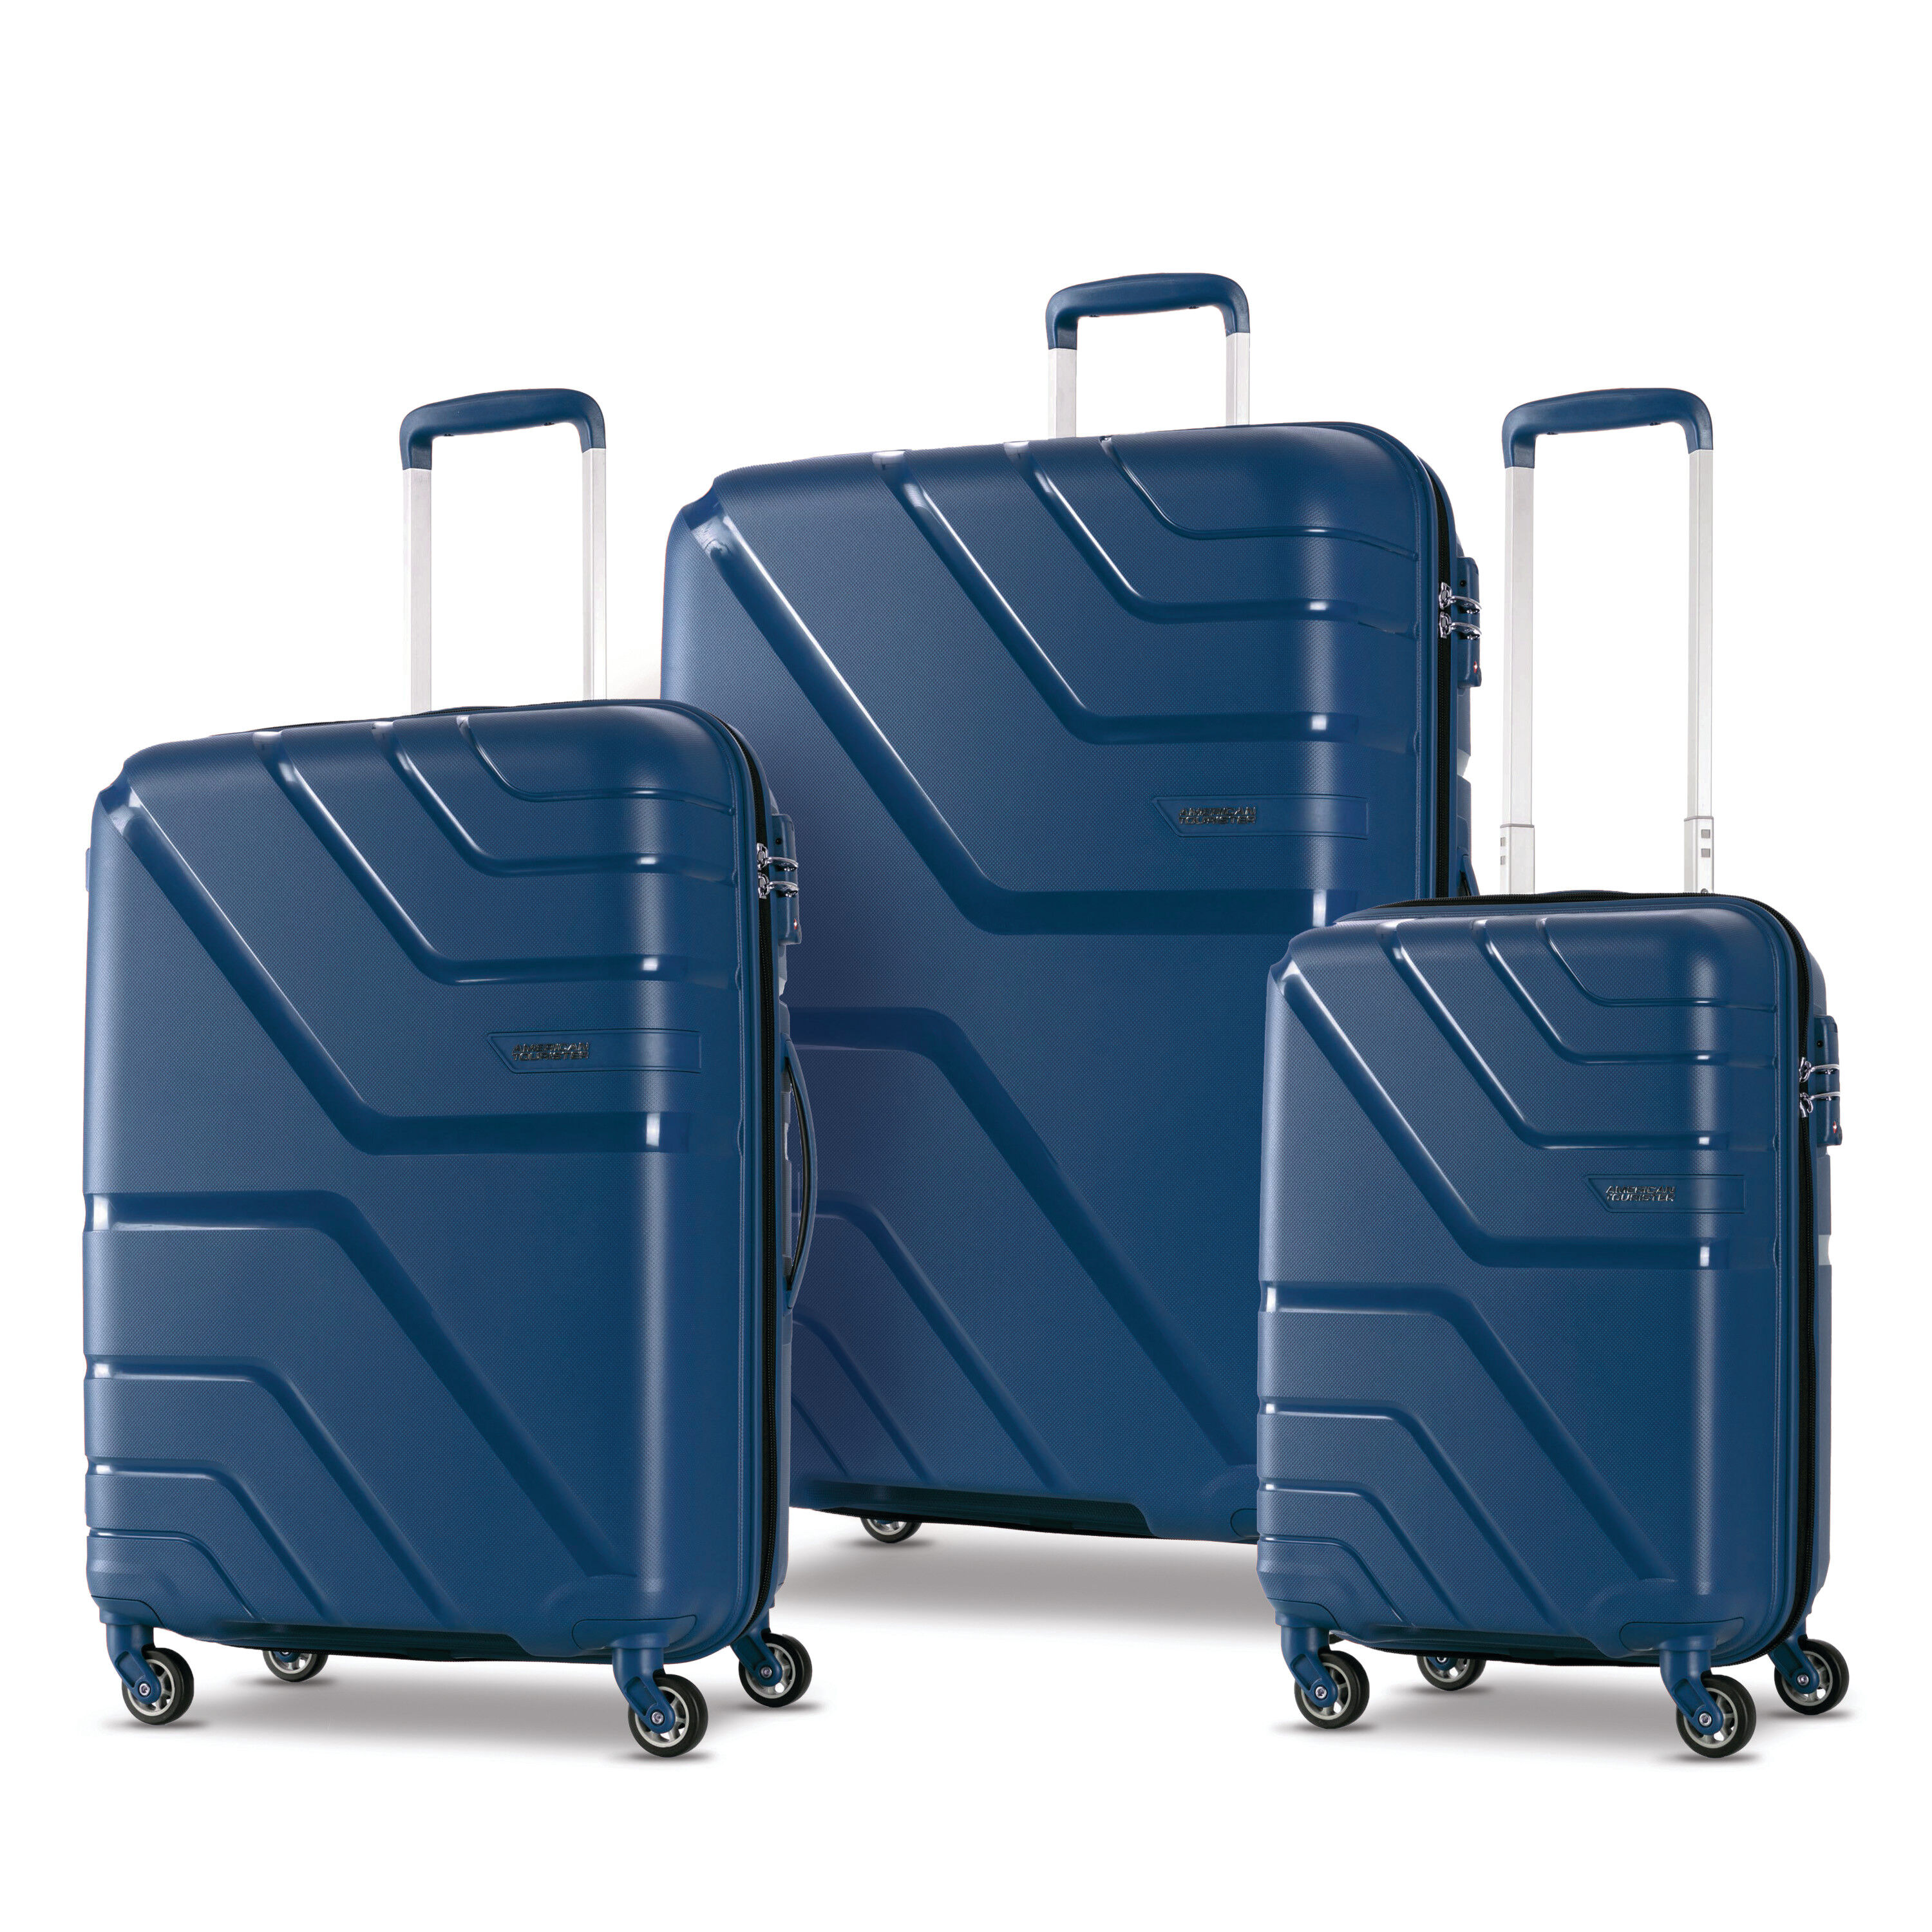 Buy American Tourister Accessories Online Kuwait